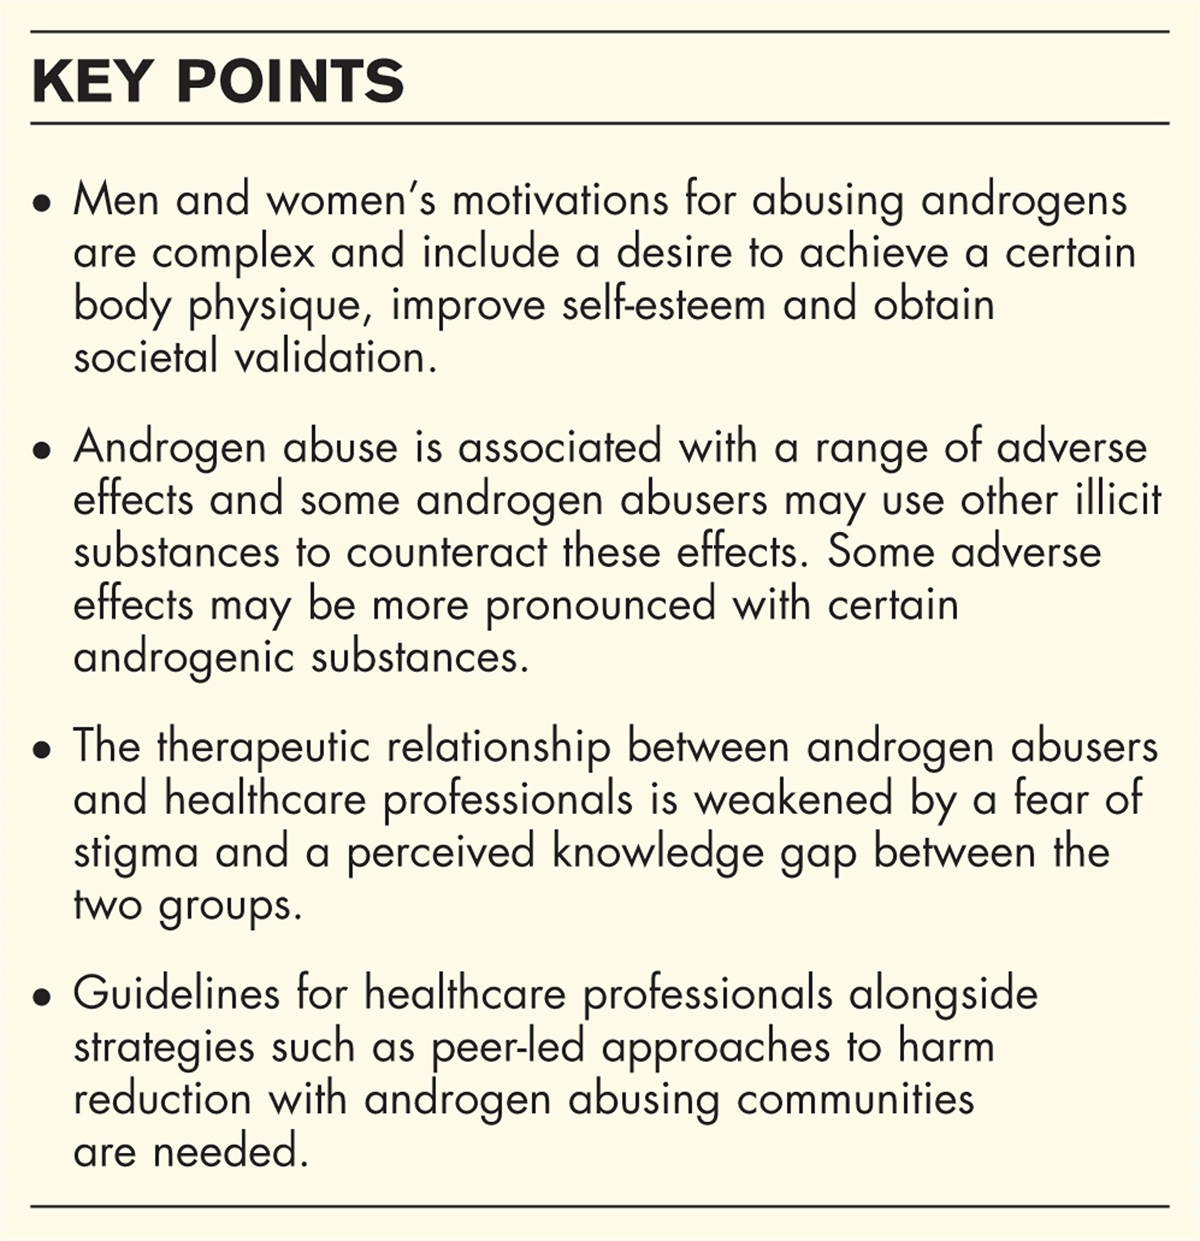 A review of recent evidence on androgen abuse from interviews with users